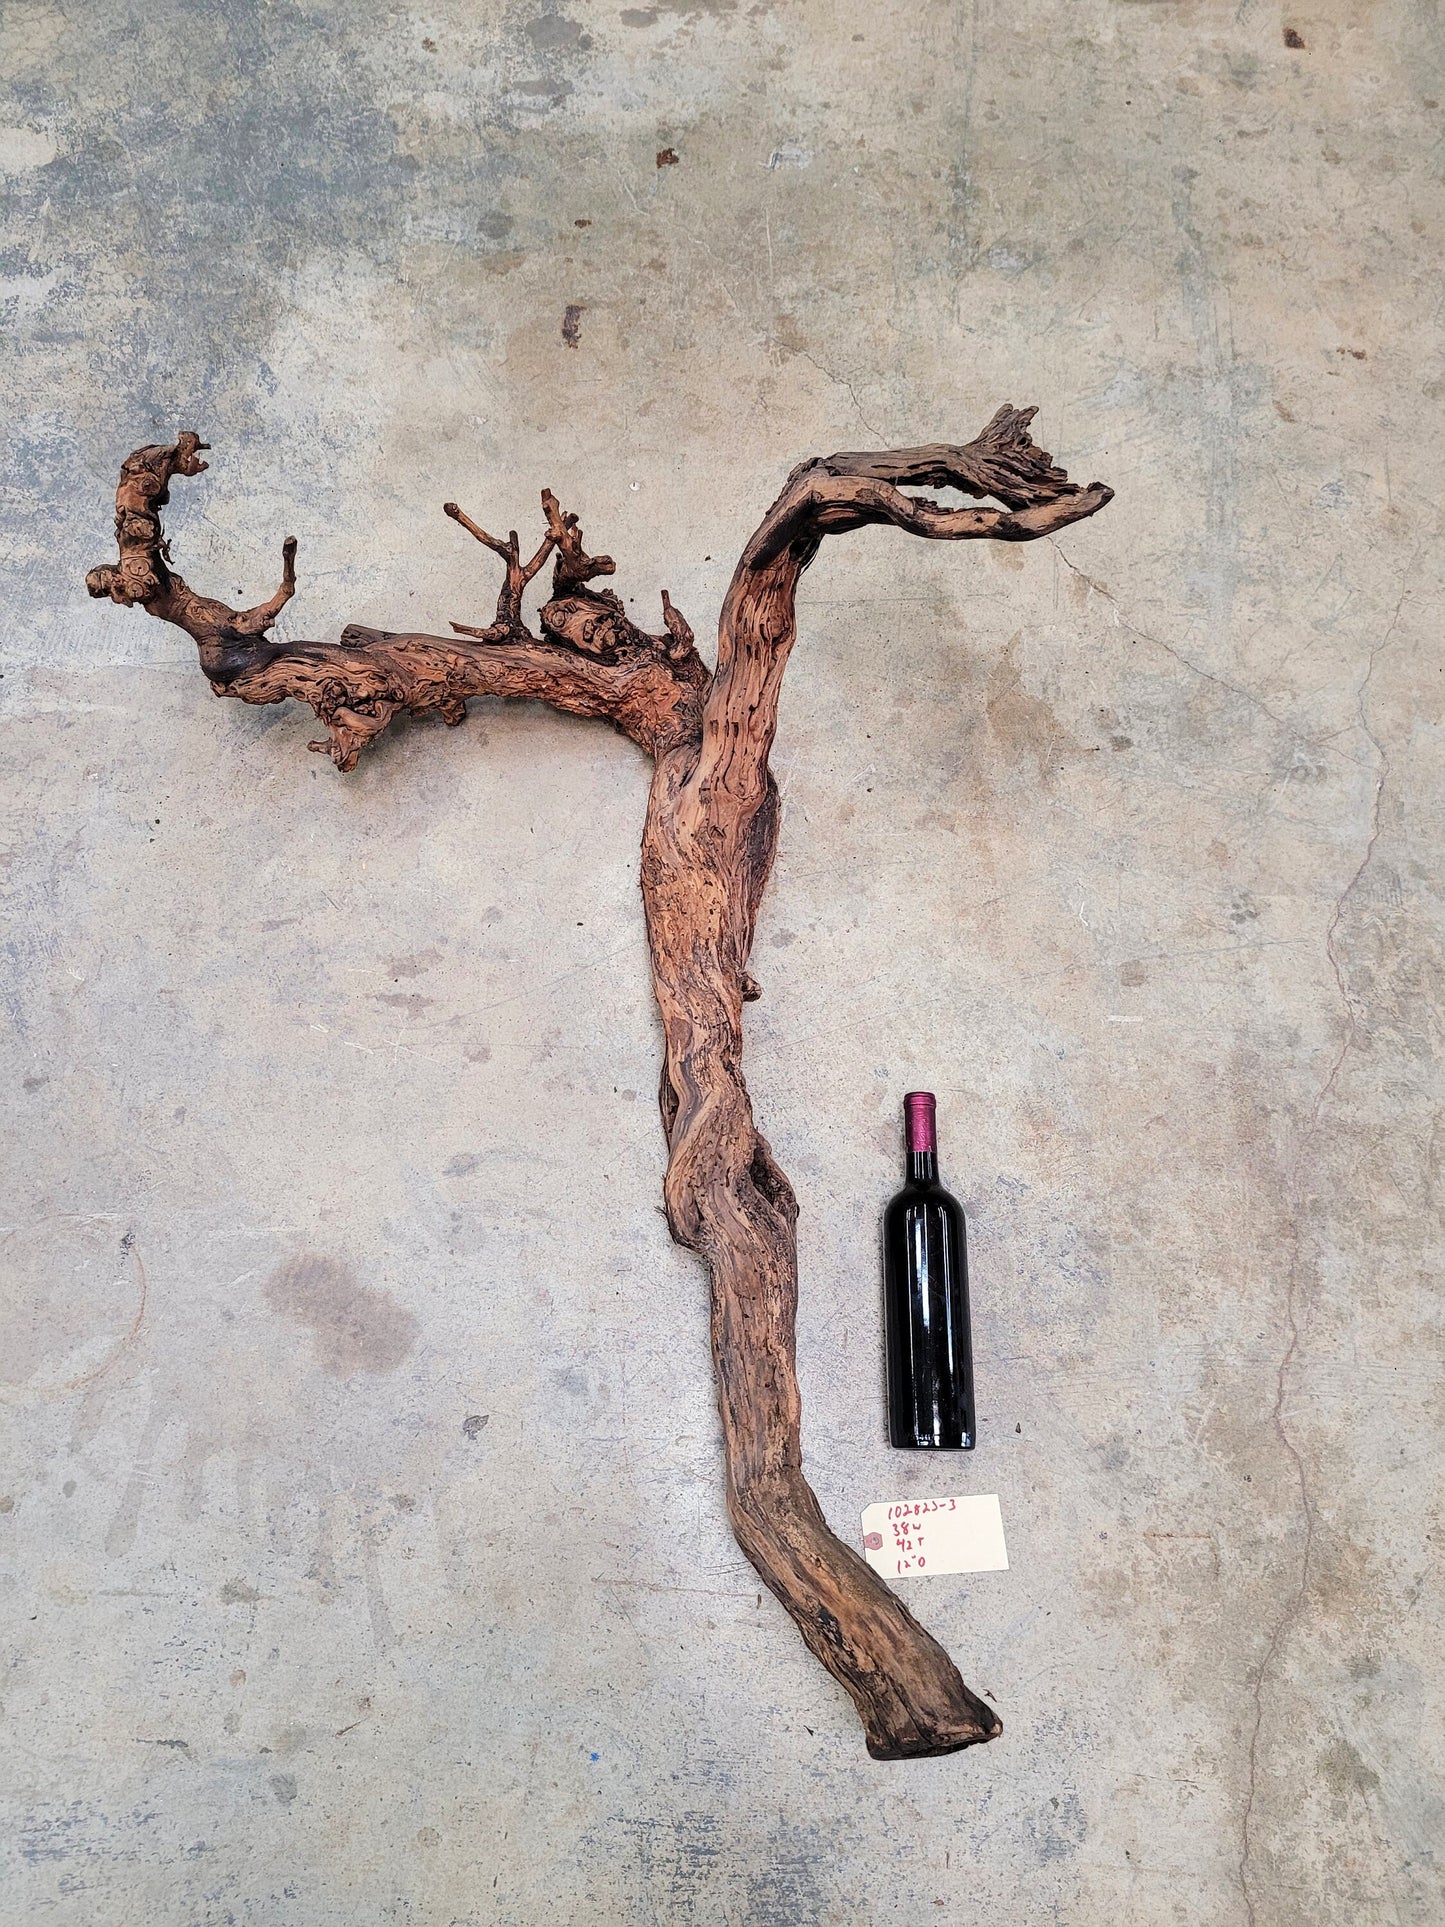 Silver Oak Cabernet Grape Vine Art from Napa 100% Recycled + Ready to Ship! 102823-3